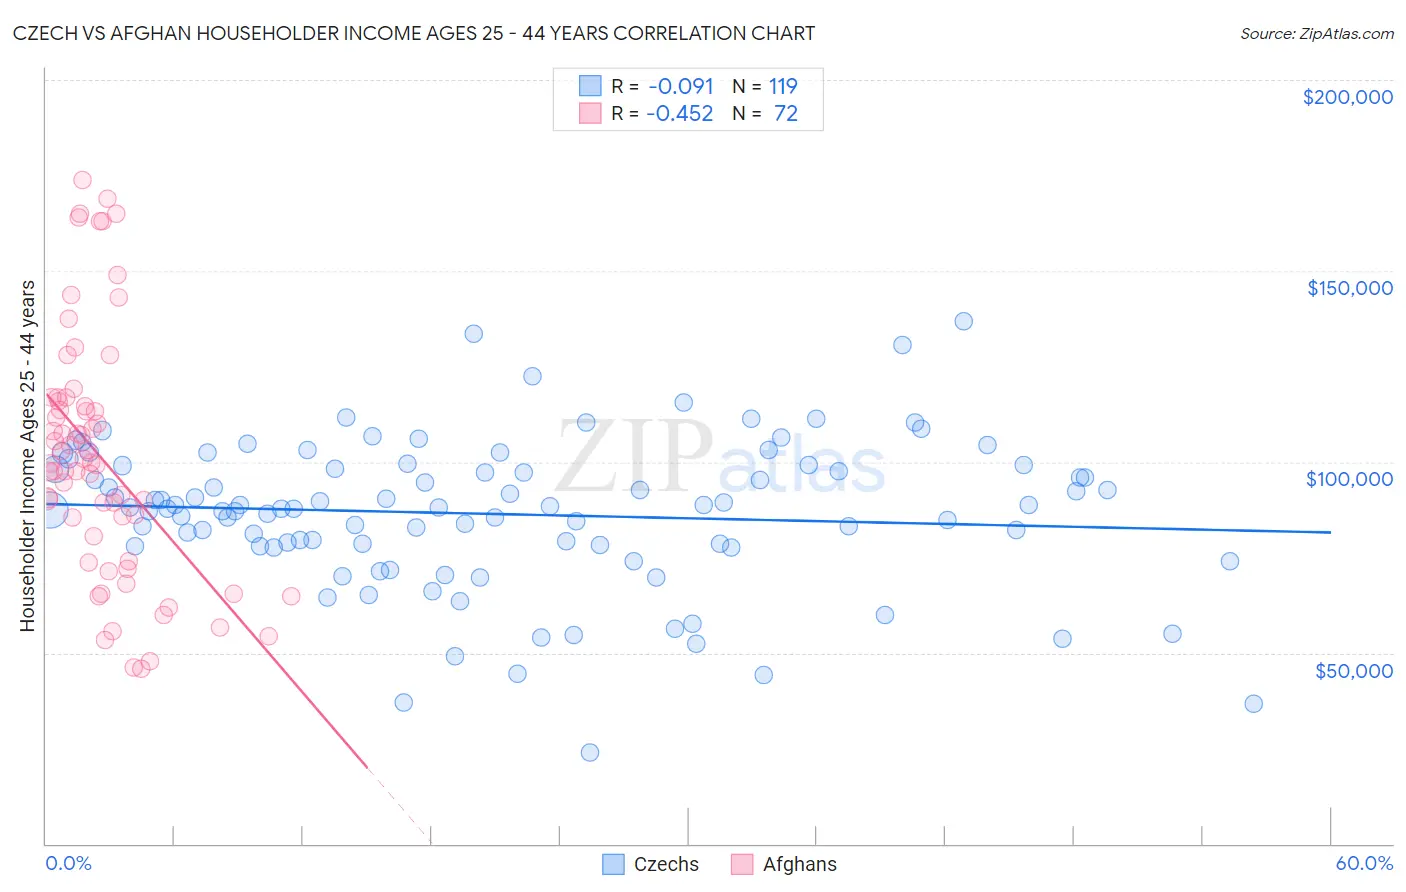 Czech vs Afghan Householder Income Ages 25 - 44 years